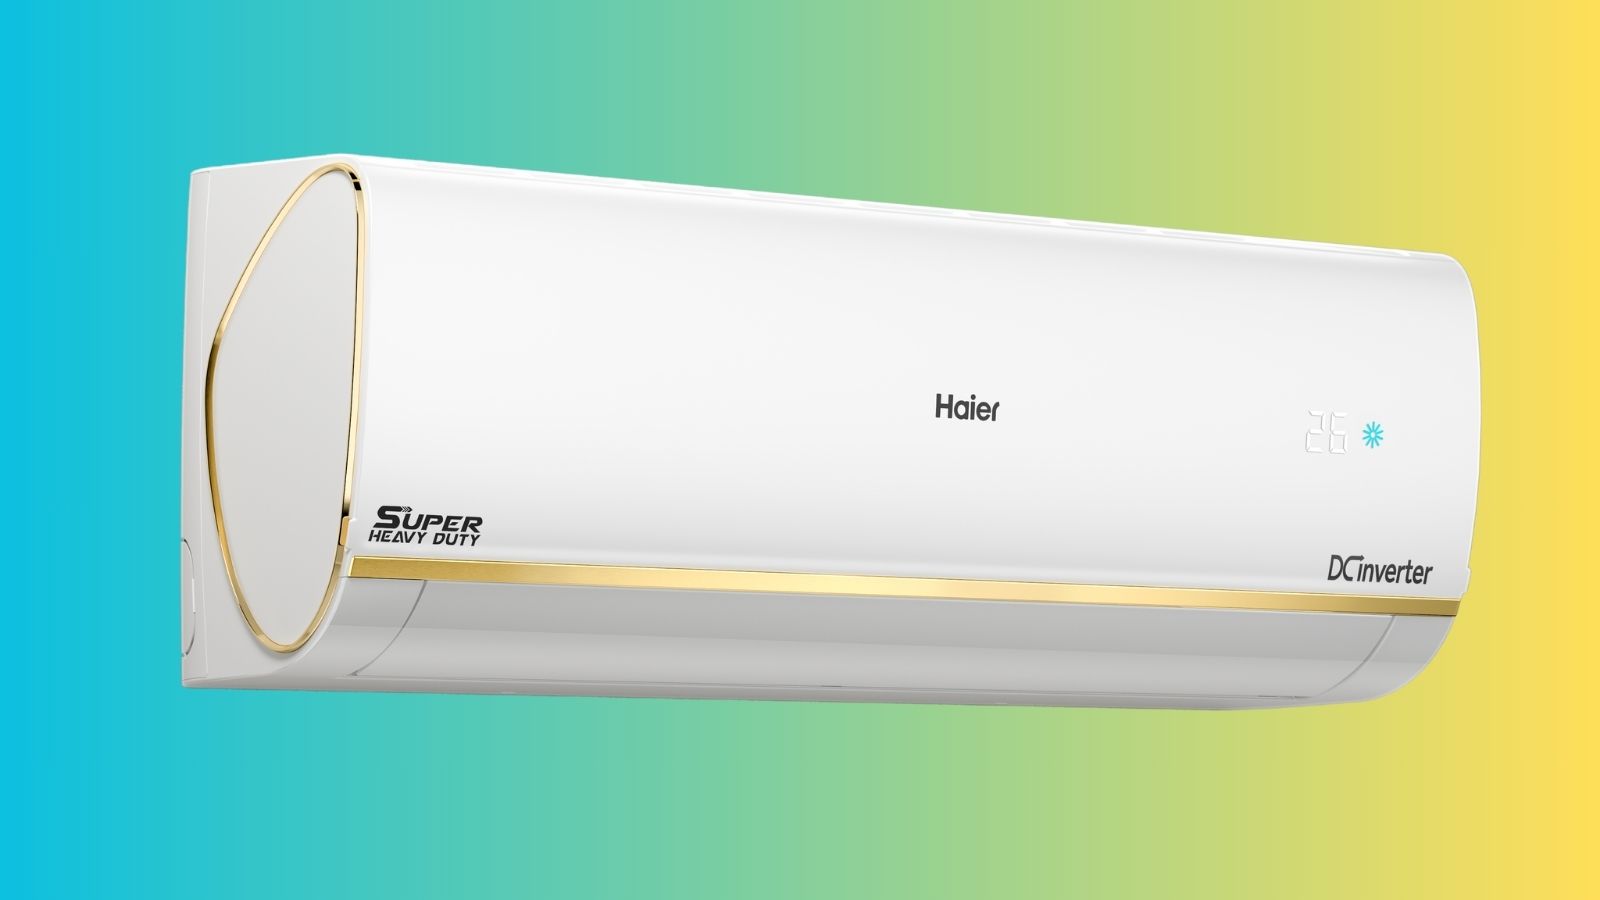 Haier India launches new range of super heavy-duty air conditioners